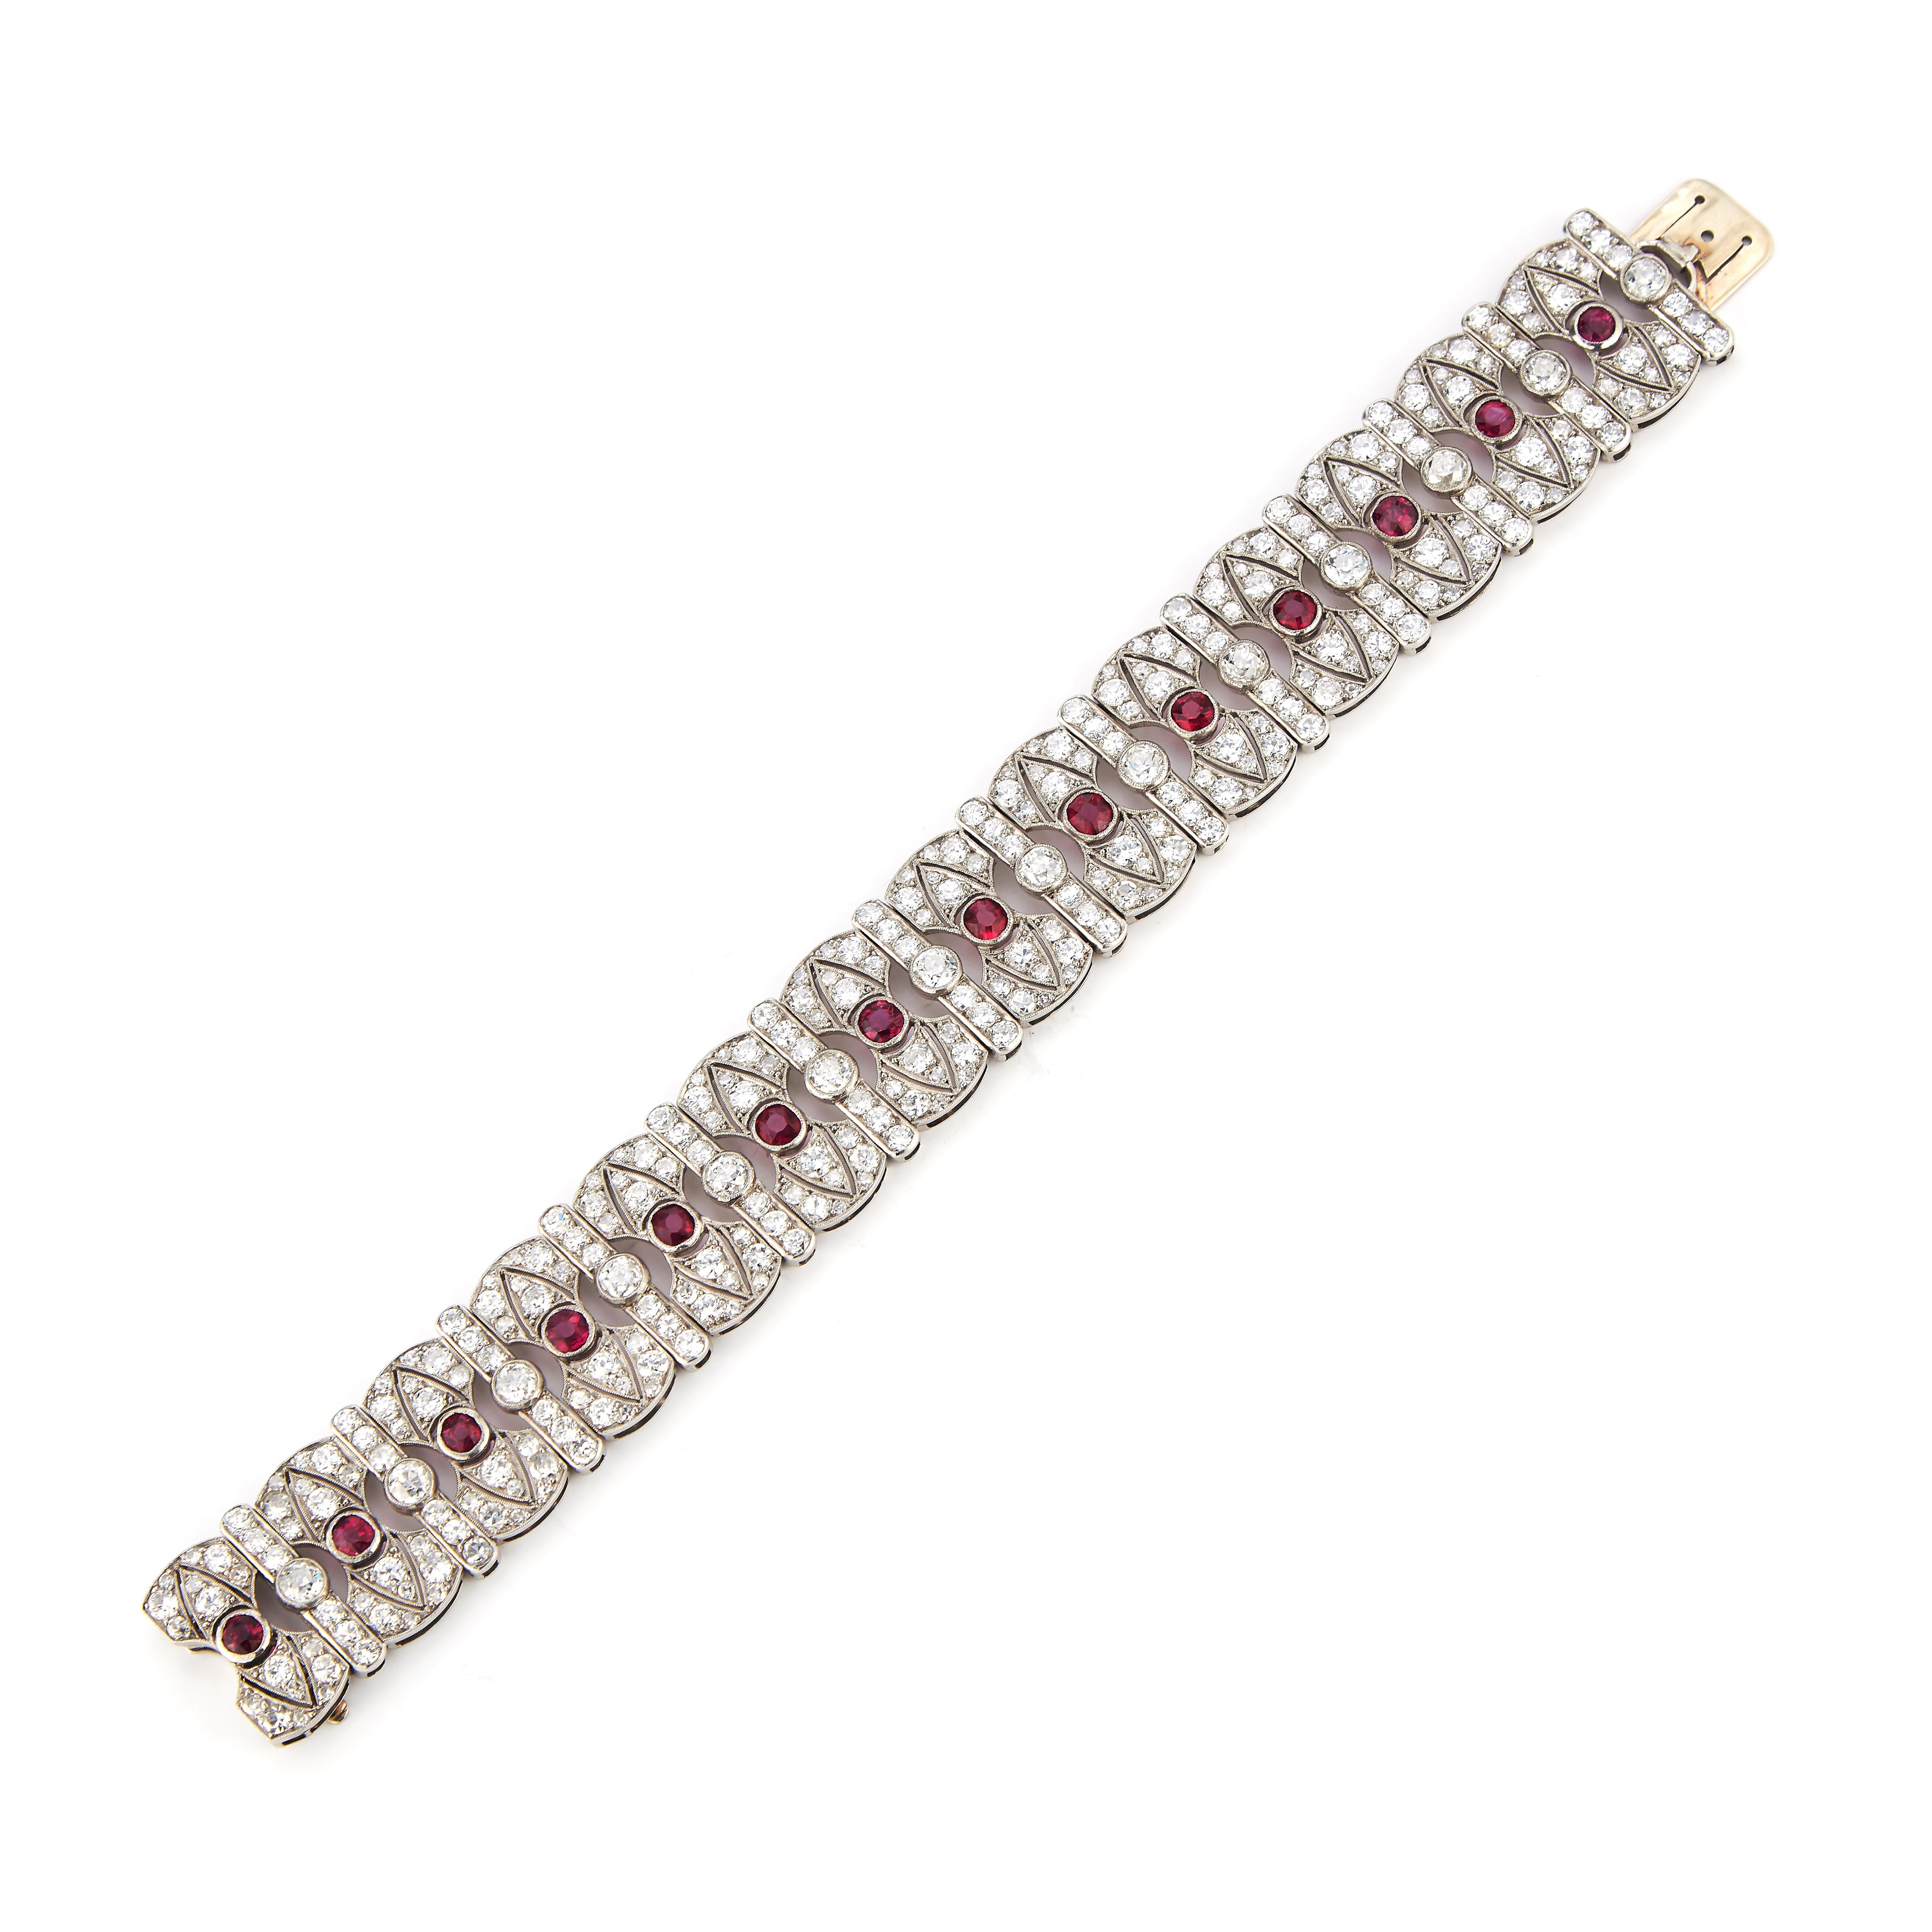 Estate Jewelry Curated by Parulina- This breath-taking bracelet features approximately 2.50ct of Rubies and approximately 20ct of Diamonds. 
Set in 18K White Gold 
7 inches in length

Metal: 18 White Gold
Gemstone Carat Weight: 2.50ct Rubies
Diamond